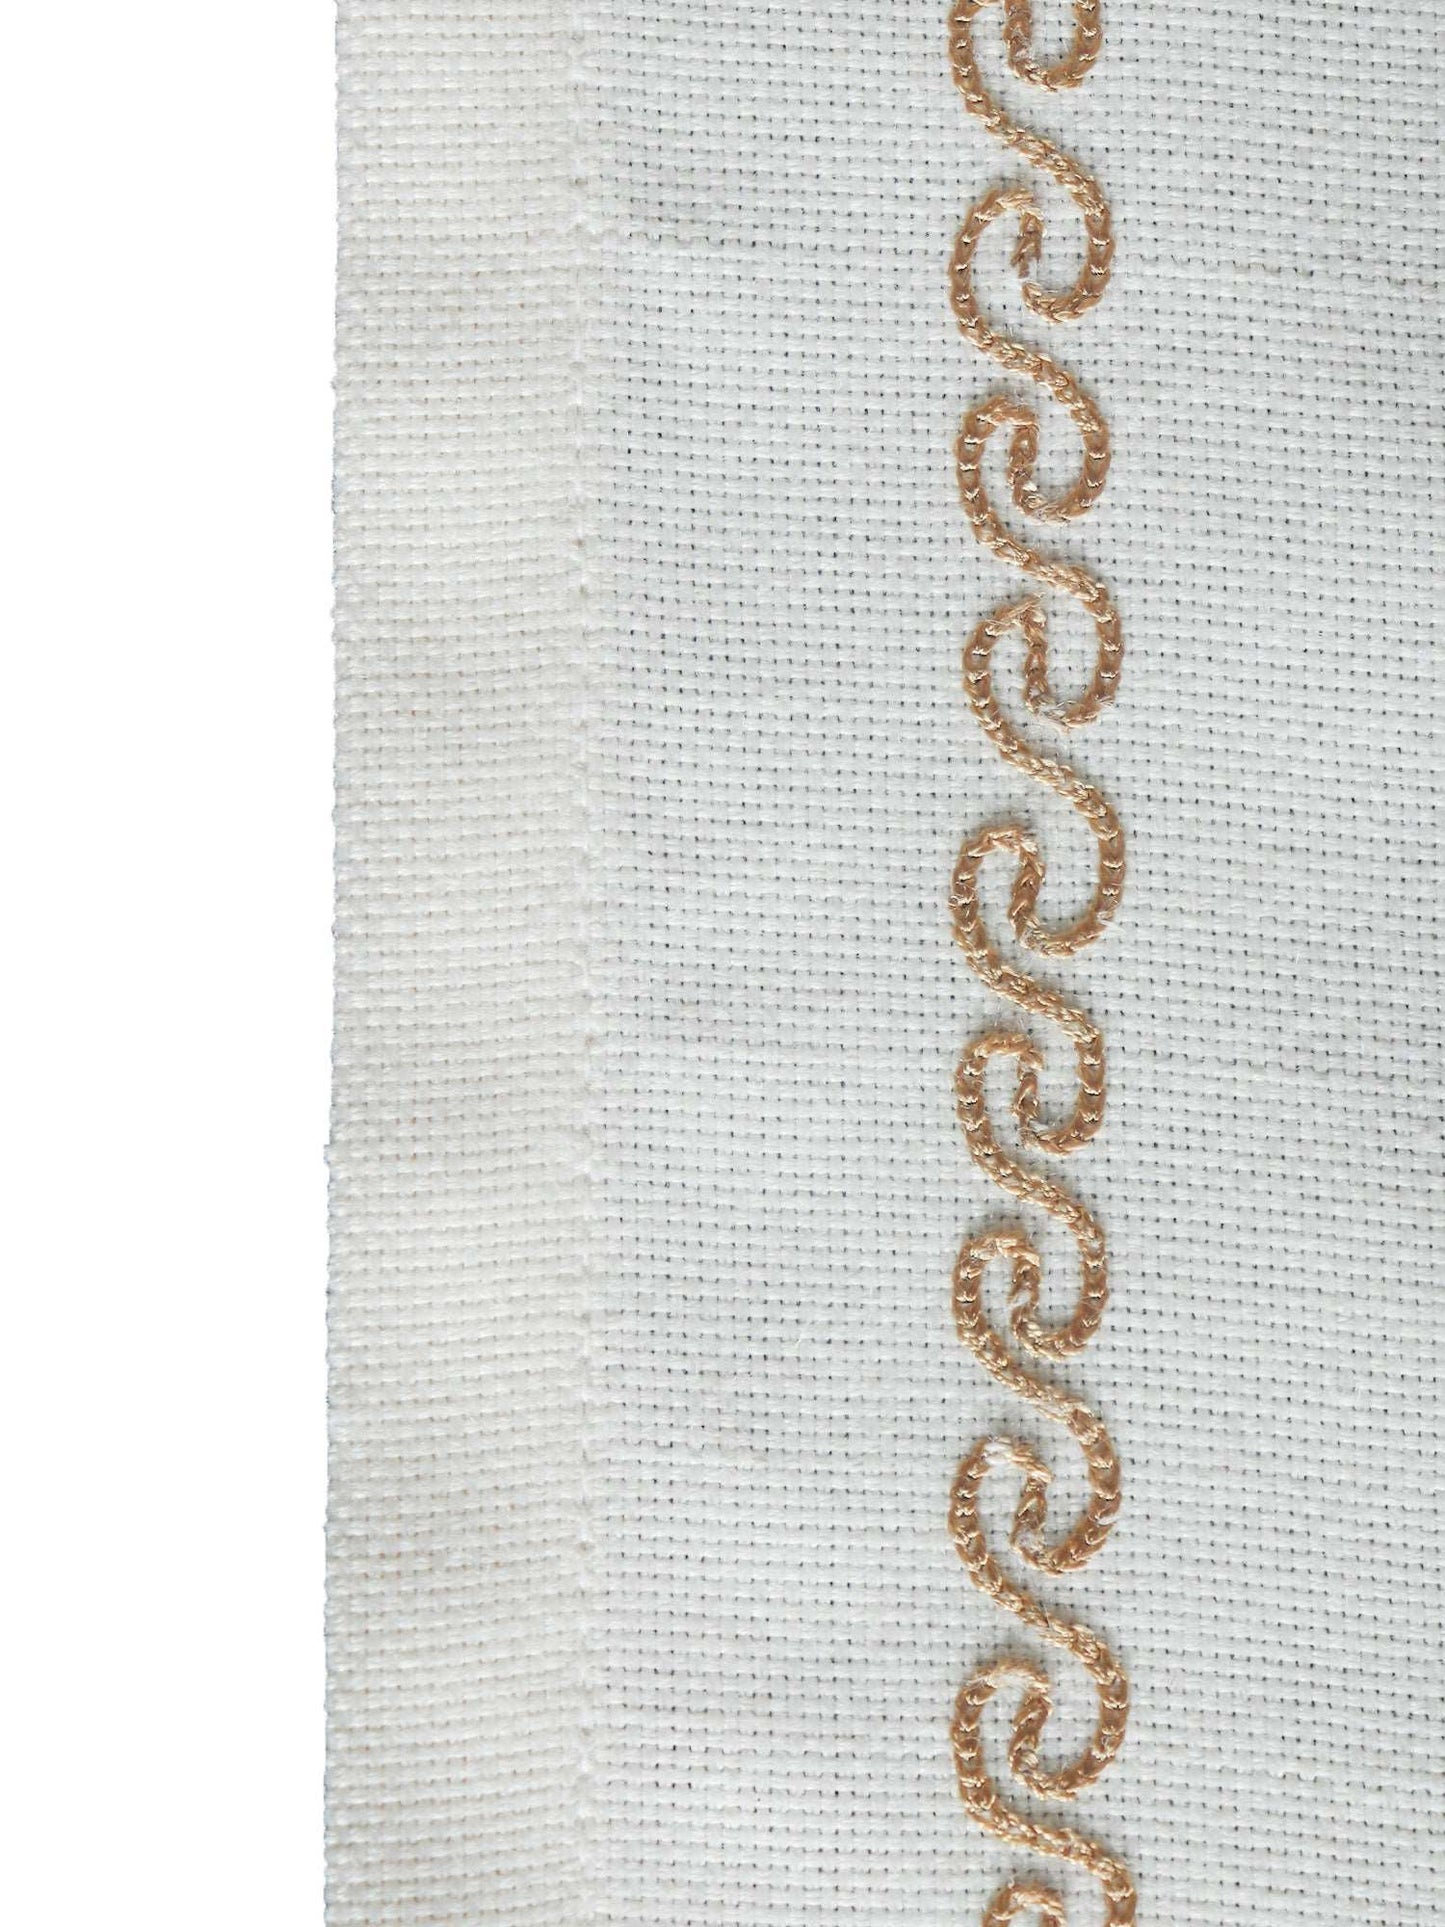 wavy patterned embroidery in golden color on an offwhite table runner